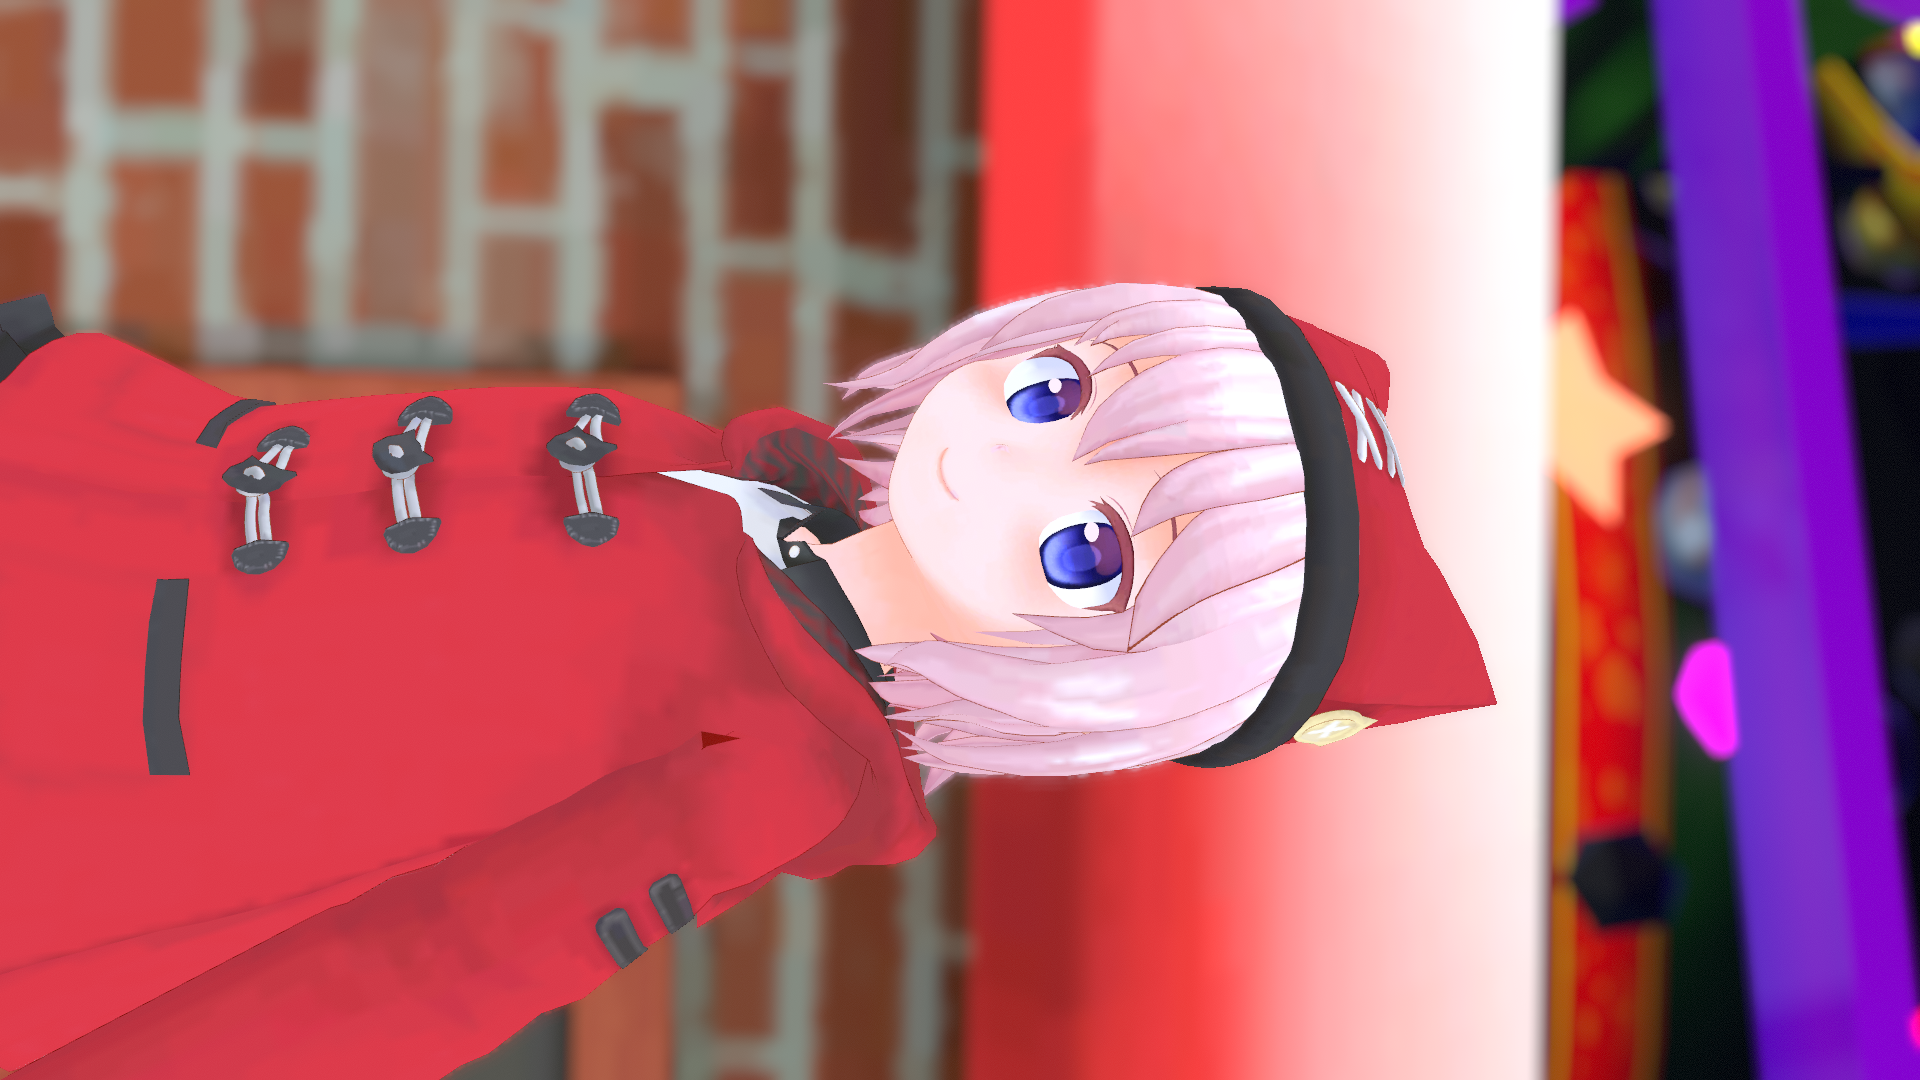 VRChat_1920x1080_2021-12-05_05-06-00.232.png